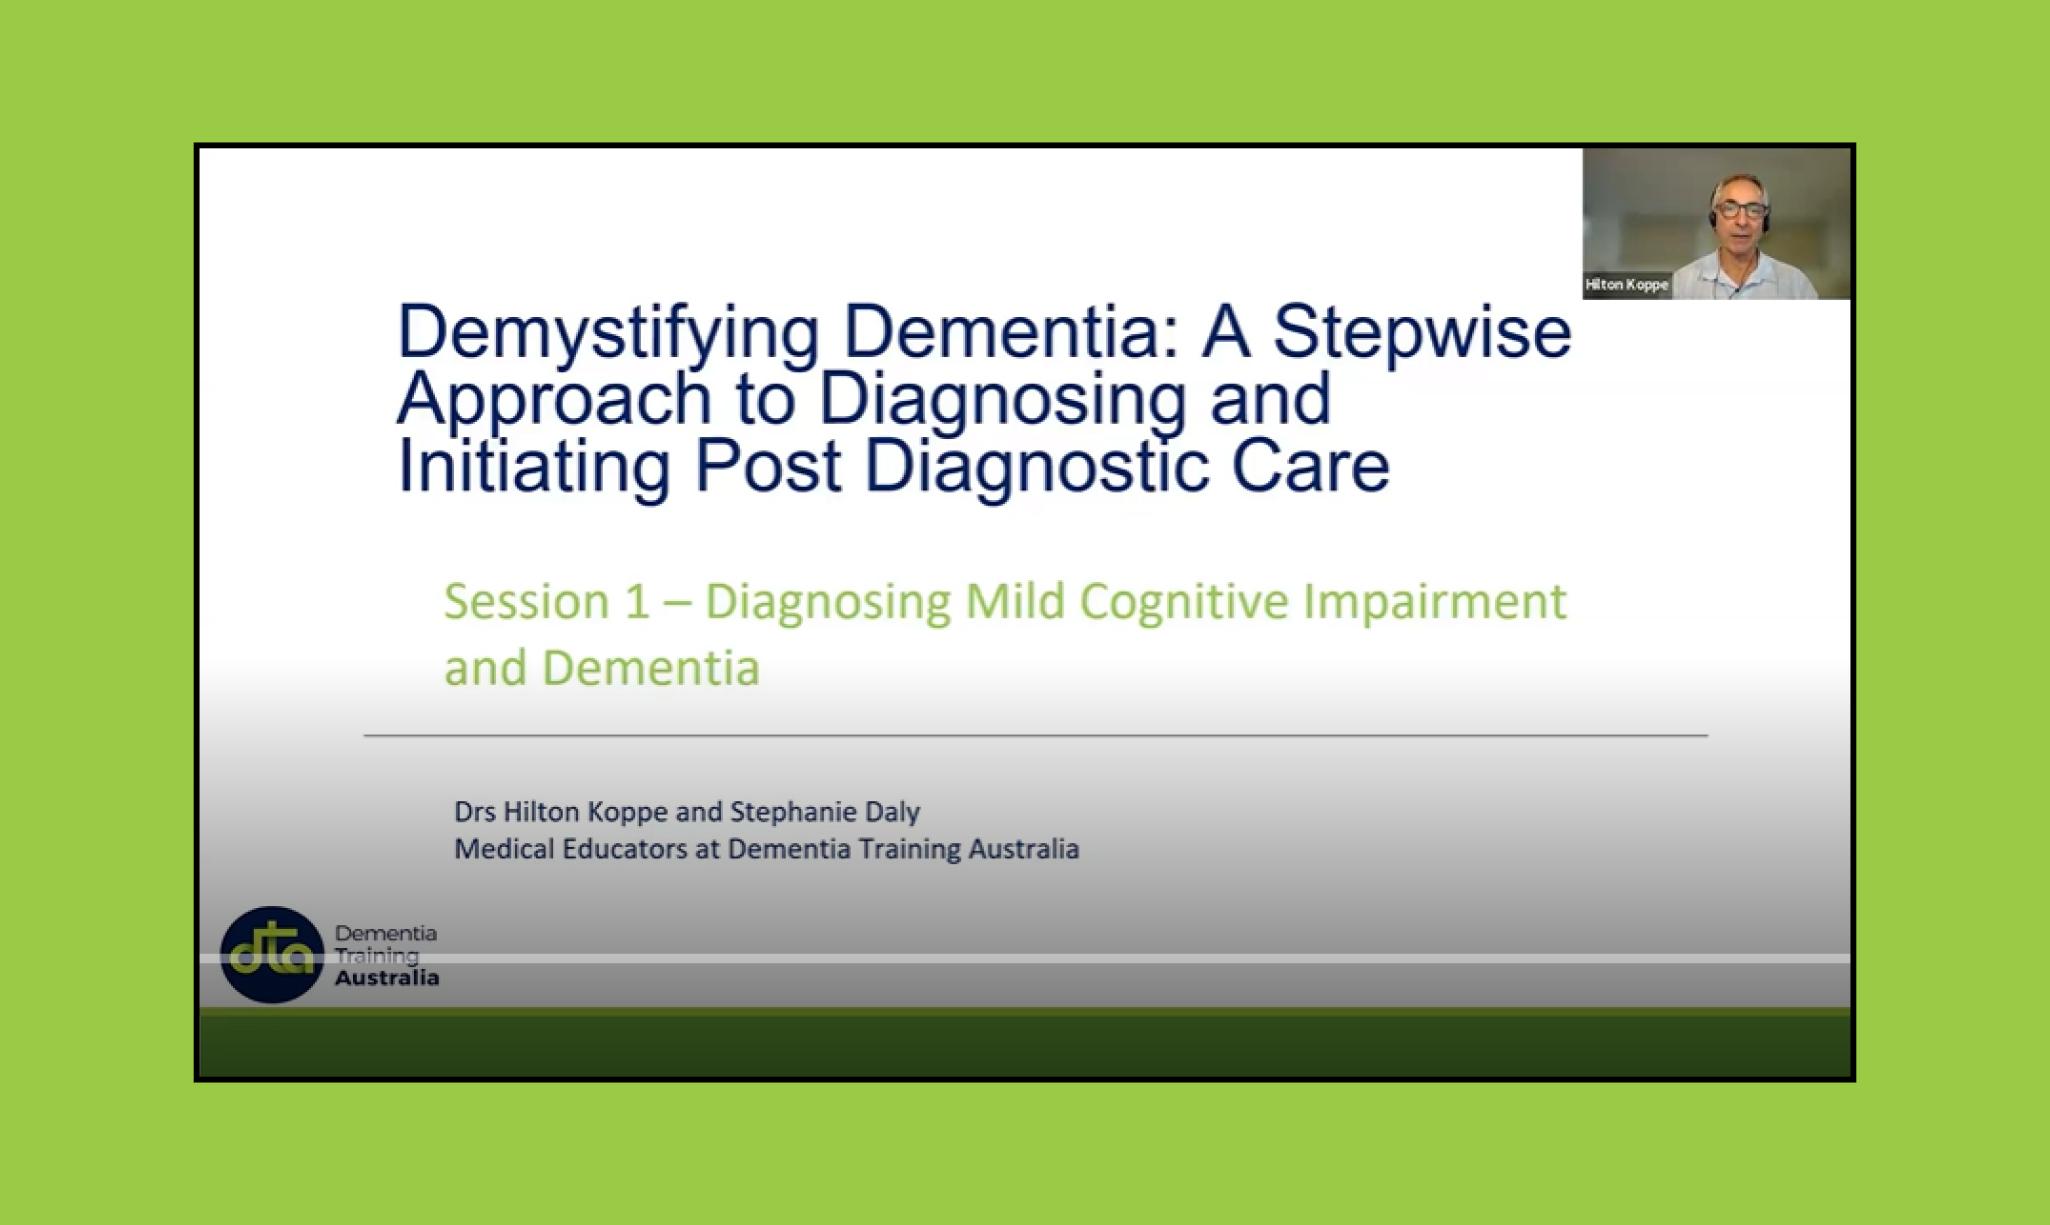 Helping general practices provide timely diagnosis of dementia